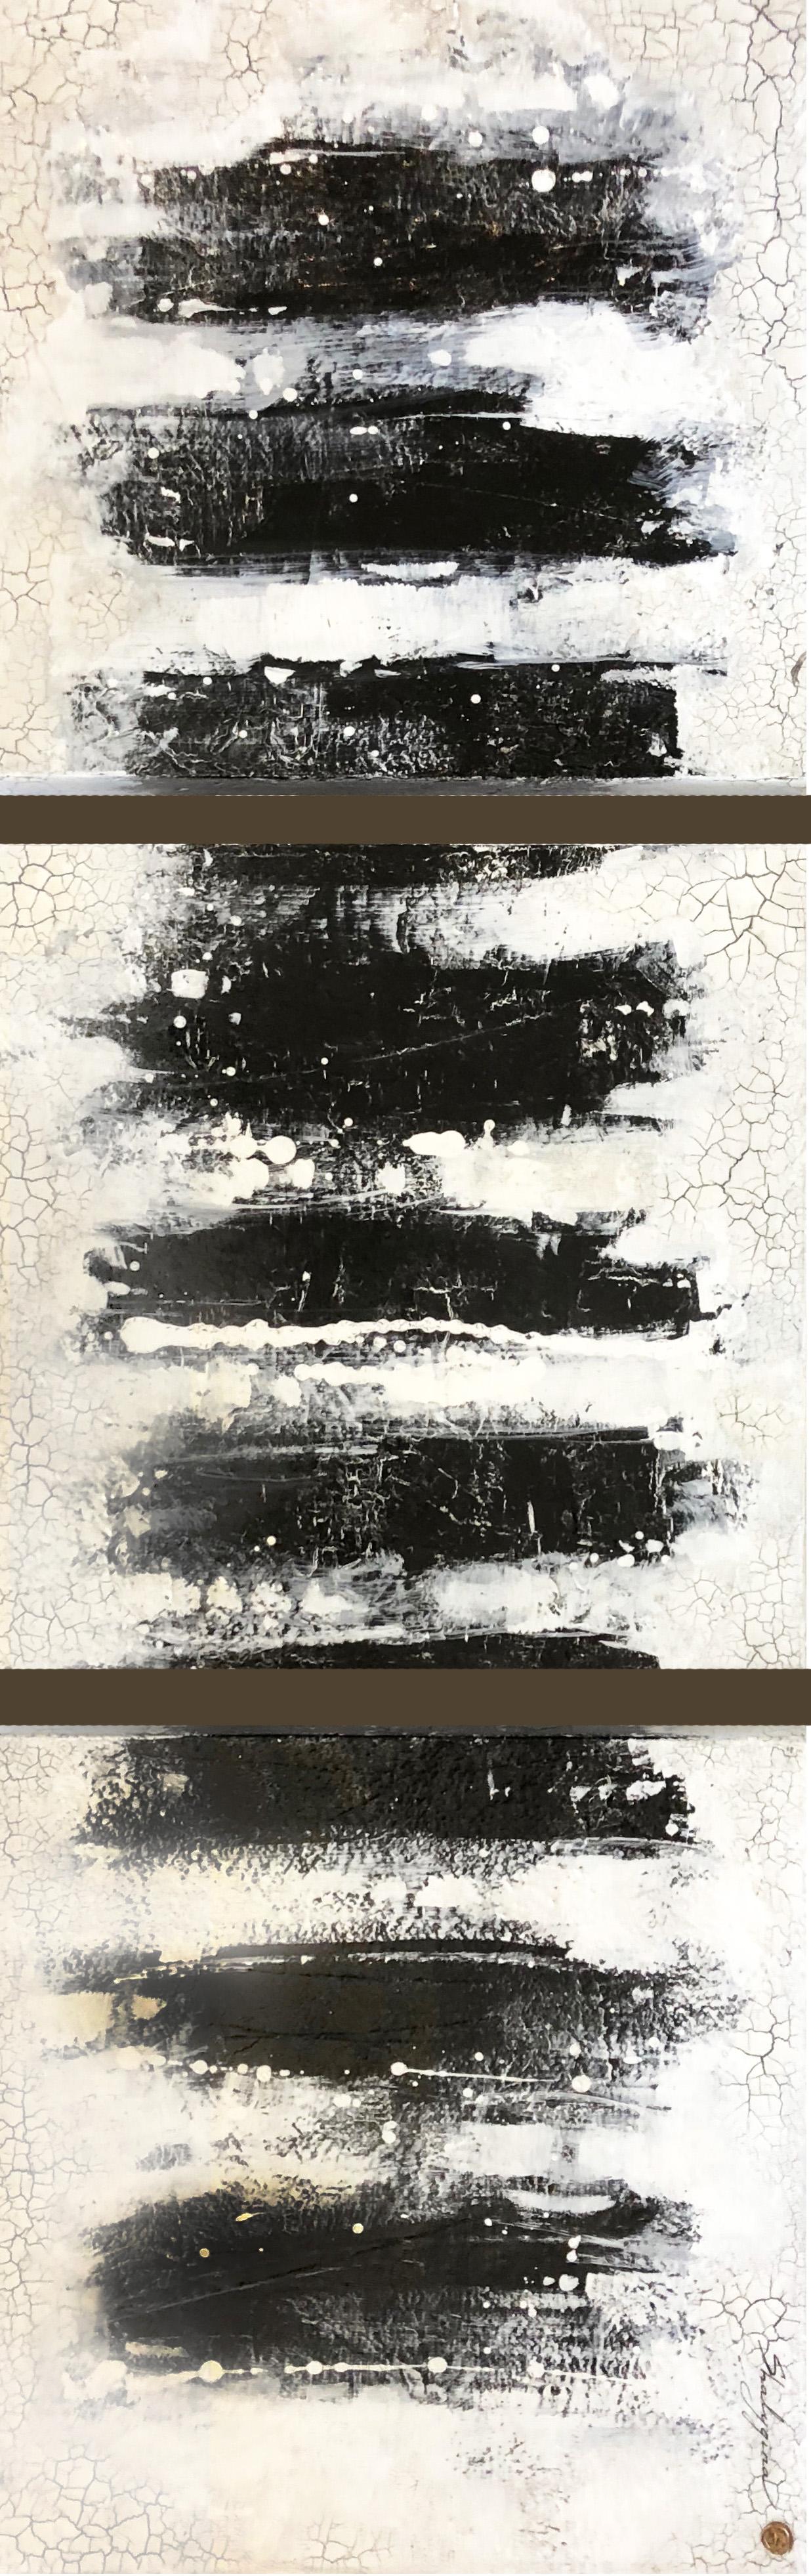 A striking black and white abstract statement piece that can be displayed vertically or horizontally. Each panel measures 24" x 24". This original mixed media work of art is made up of intricate layered texture and paint with a unique crackle